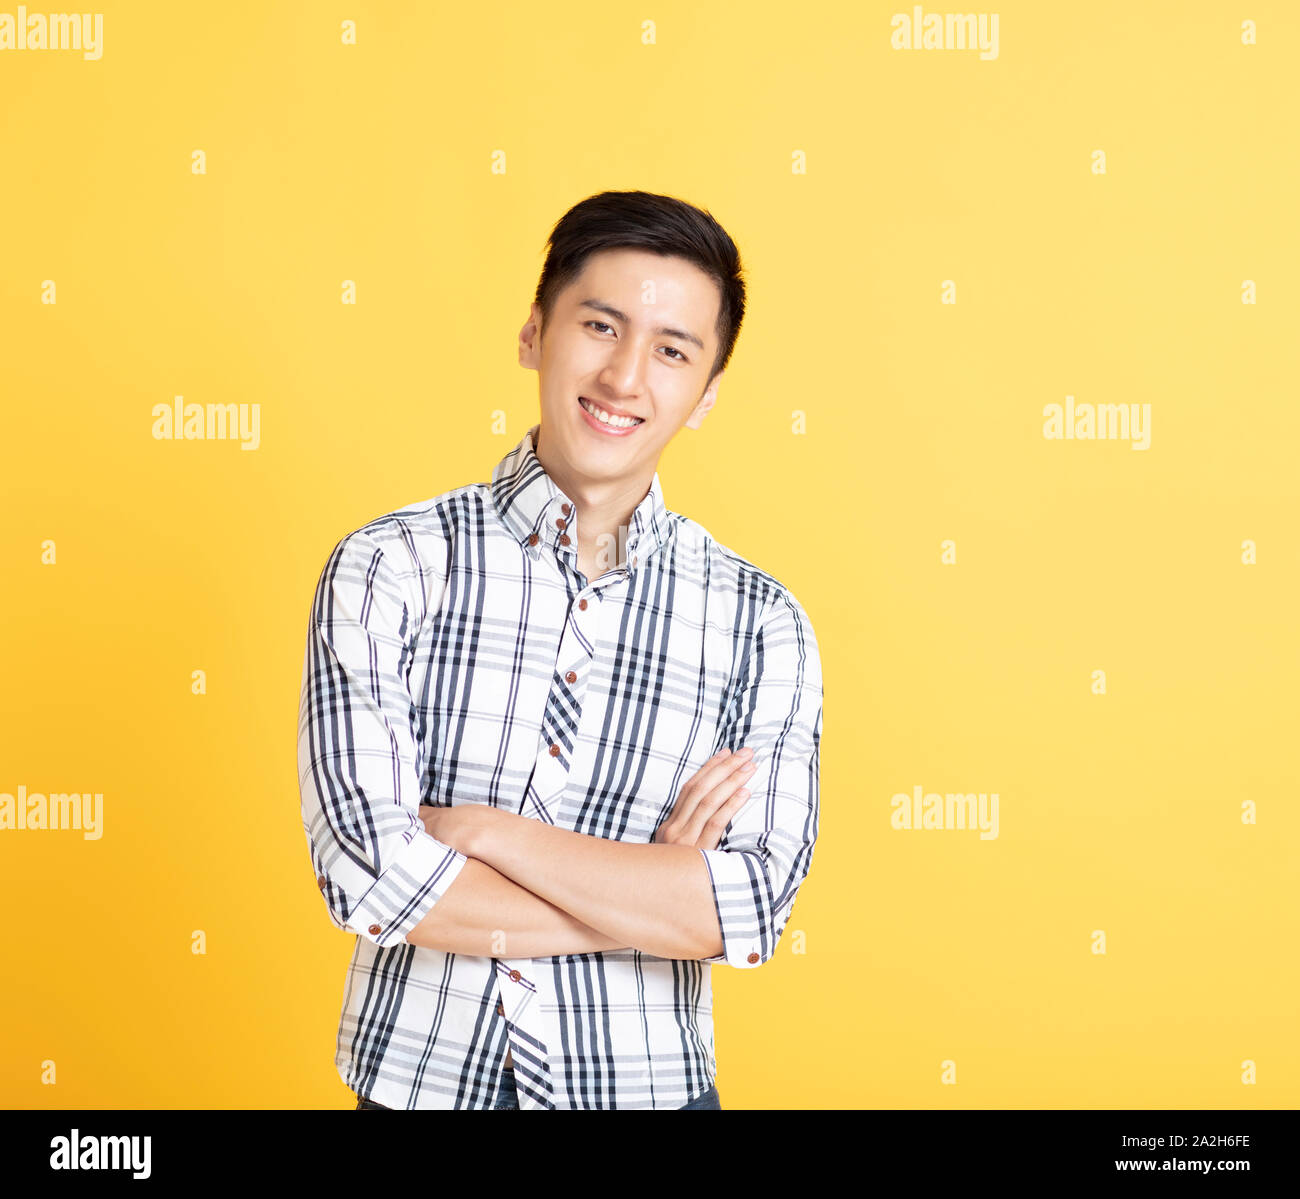 close up handsome young man smiling Stock Photo